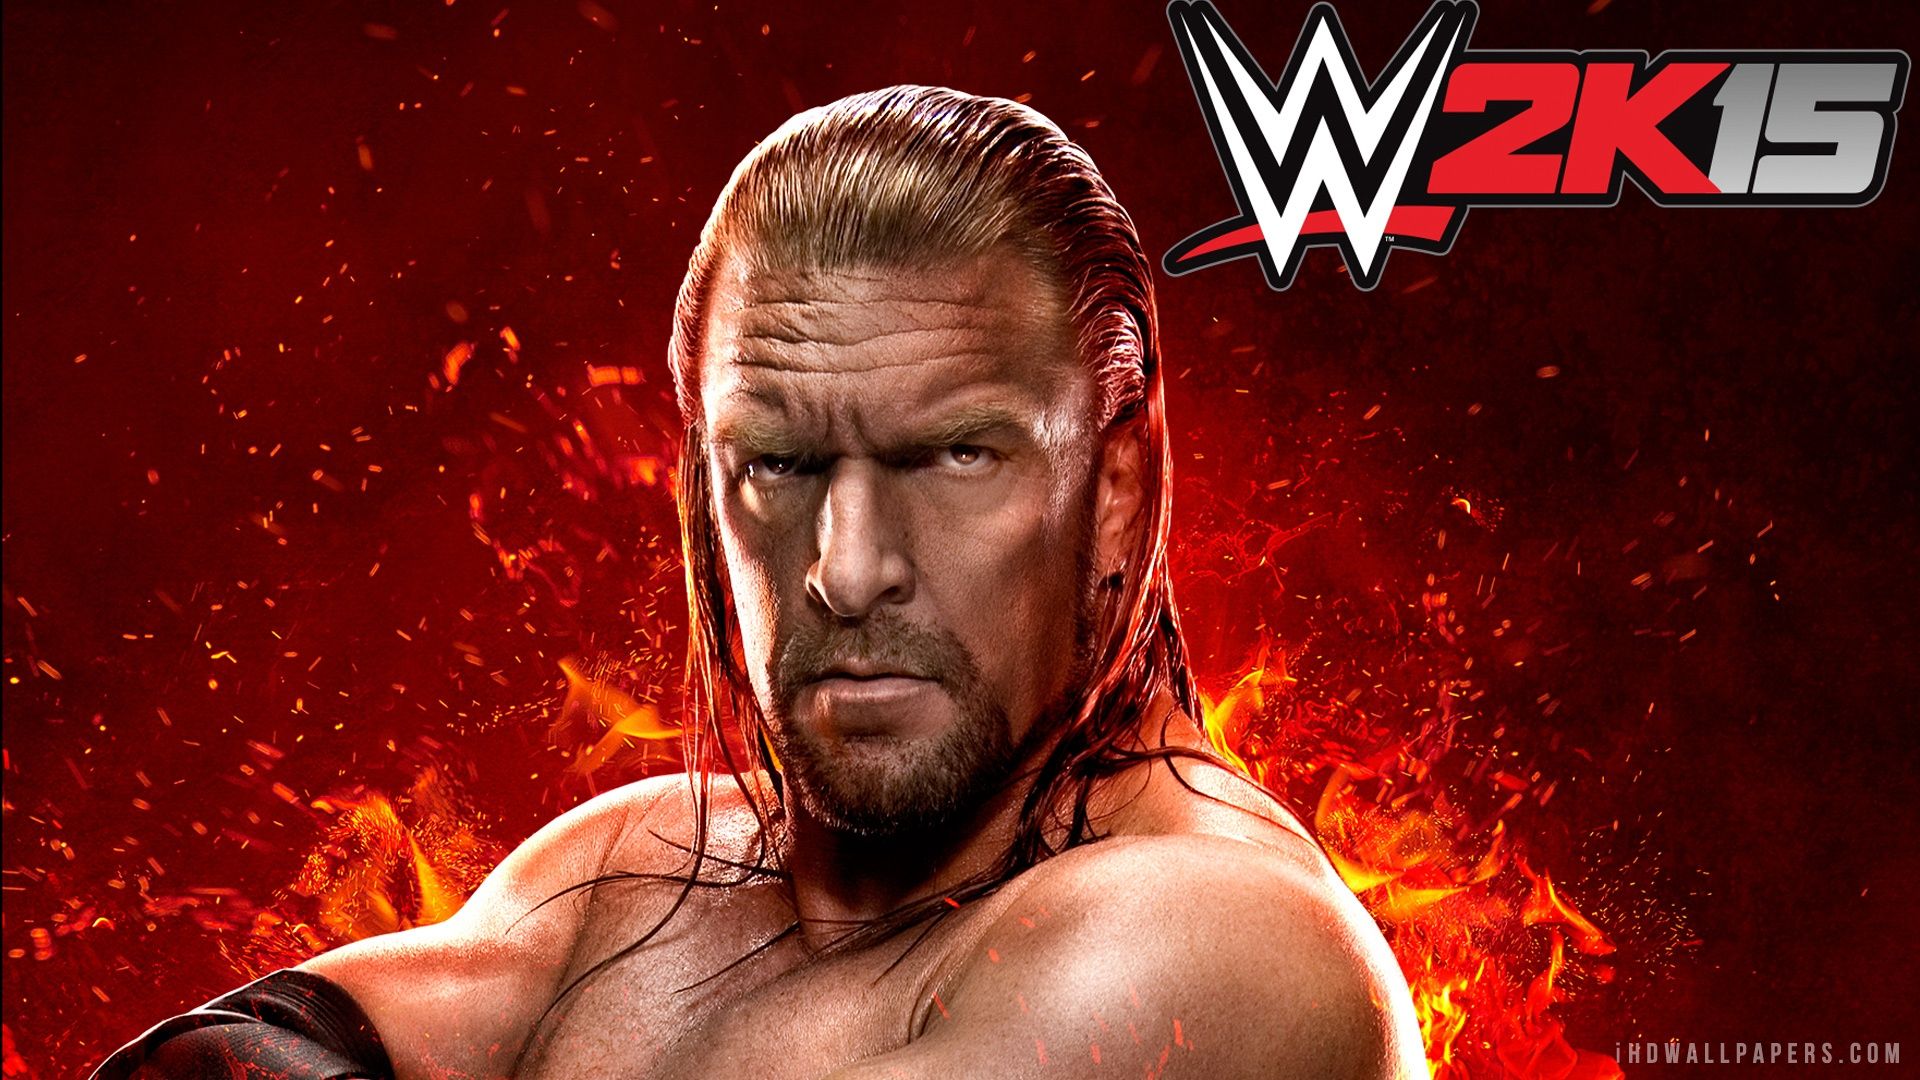 WWE 2K15 Wallpaper. NBA 2K15 Wallpaper, WWE 2K15 Wallpaper and 2K15 Stephen Curry Wallpaper